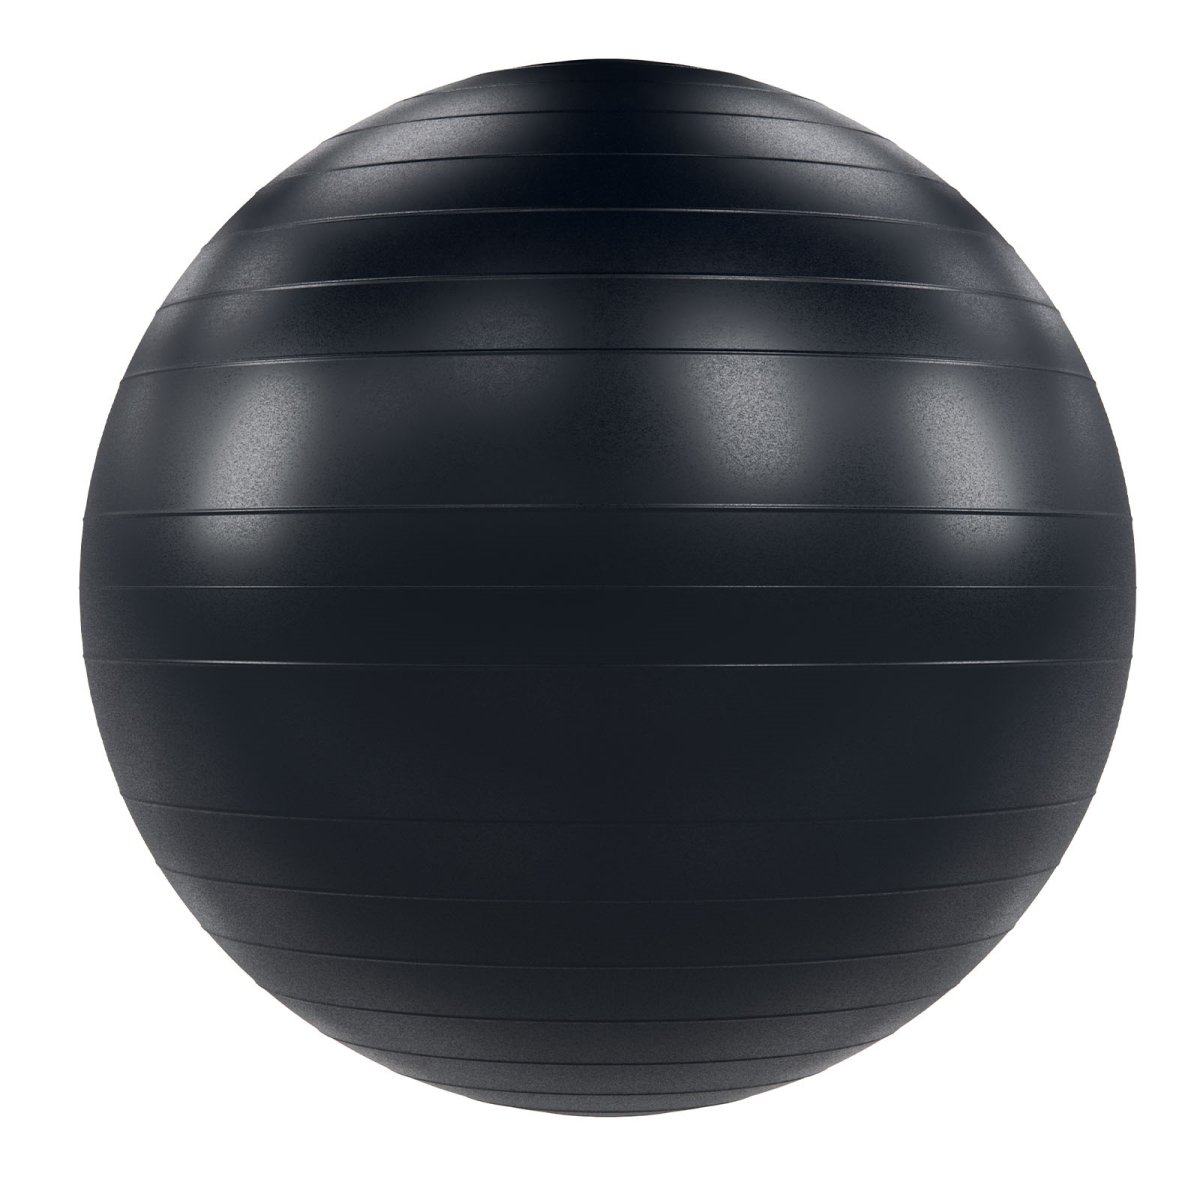 Picture of Power Systems 80755 VersaBall Pro 65cm - Black